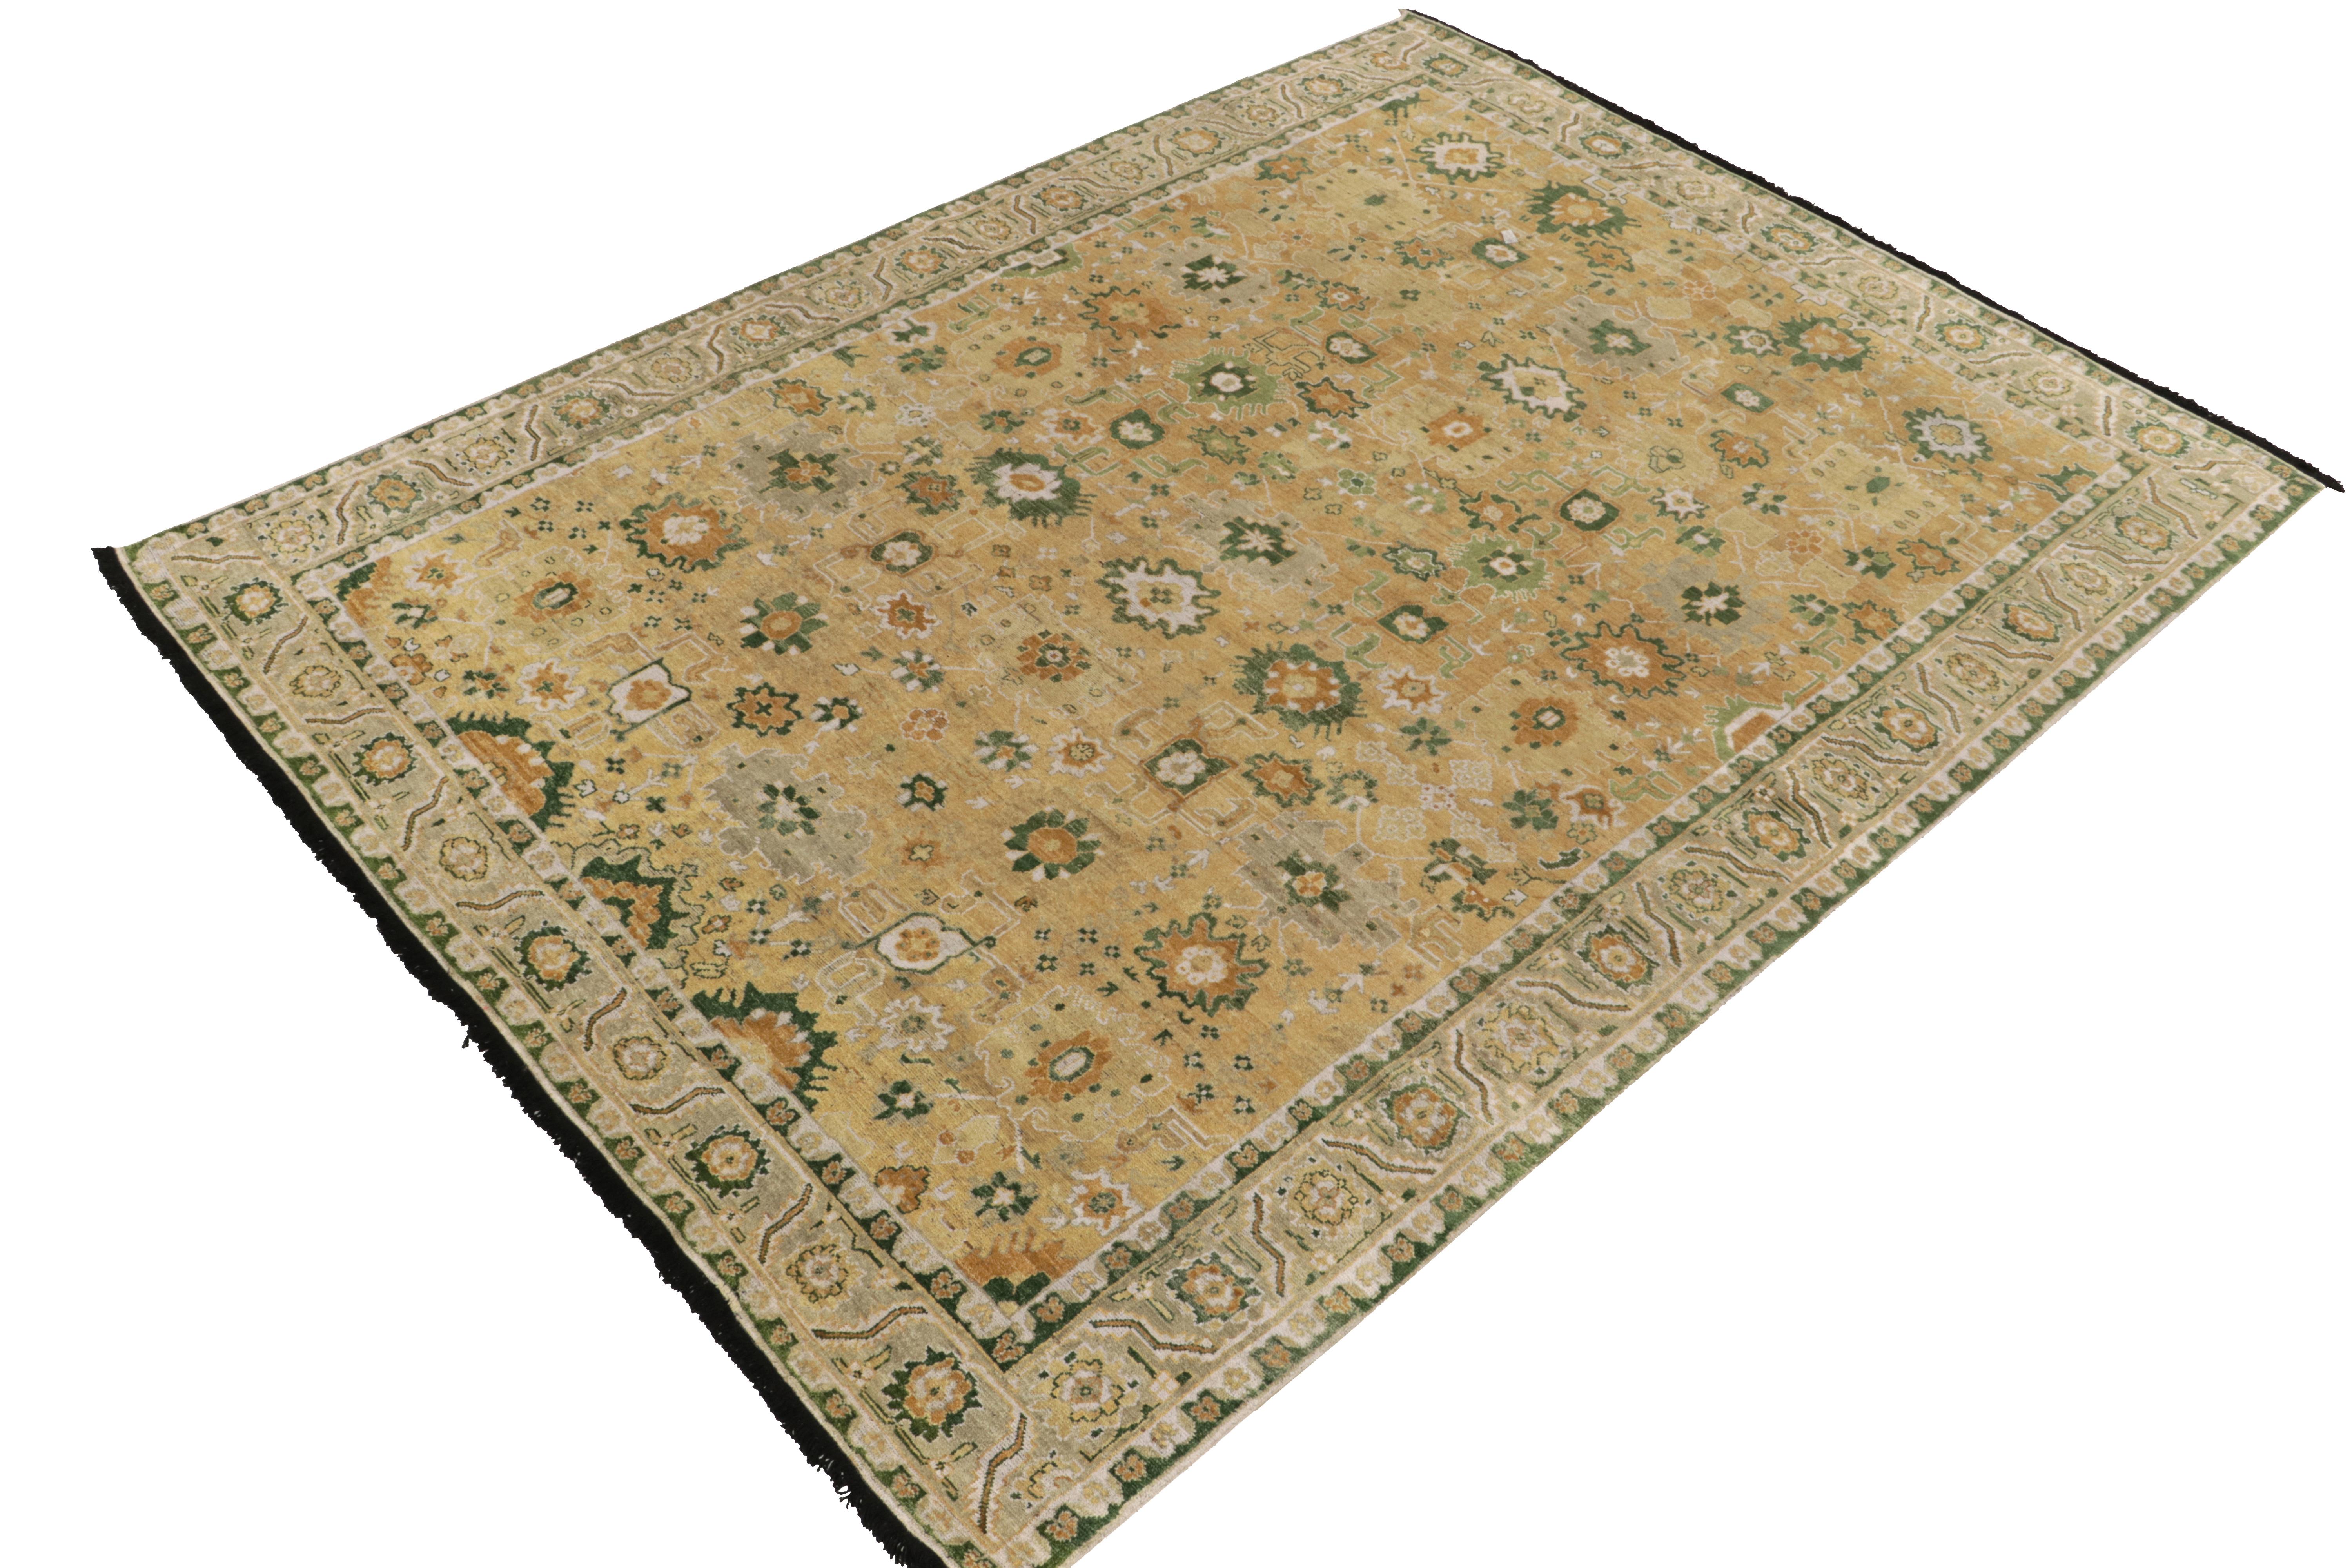 Tribal Rug & Kilim's Transitional Agra Style Rug in Green, Gold & White Floral Pattern For Sale